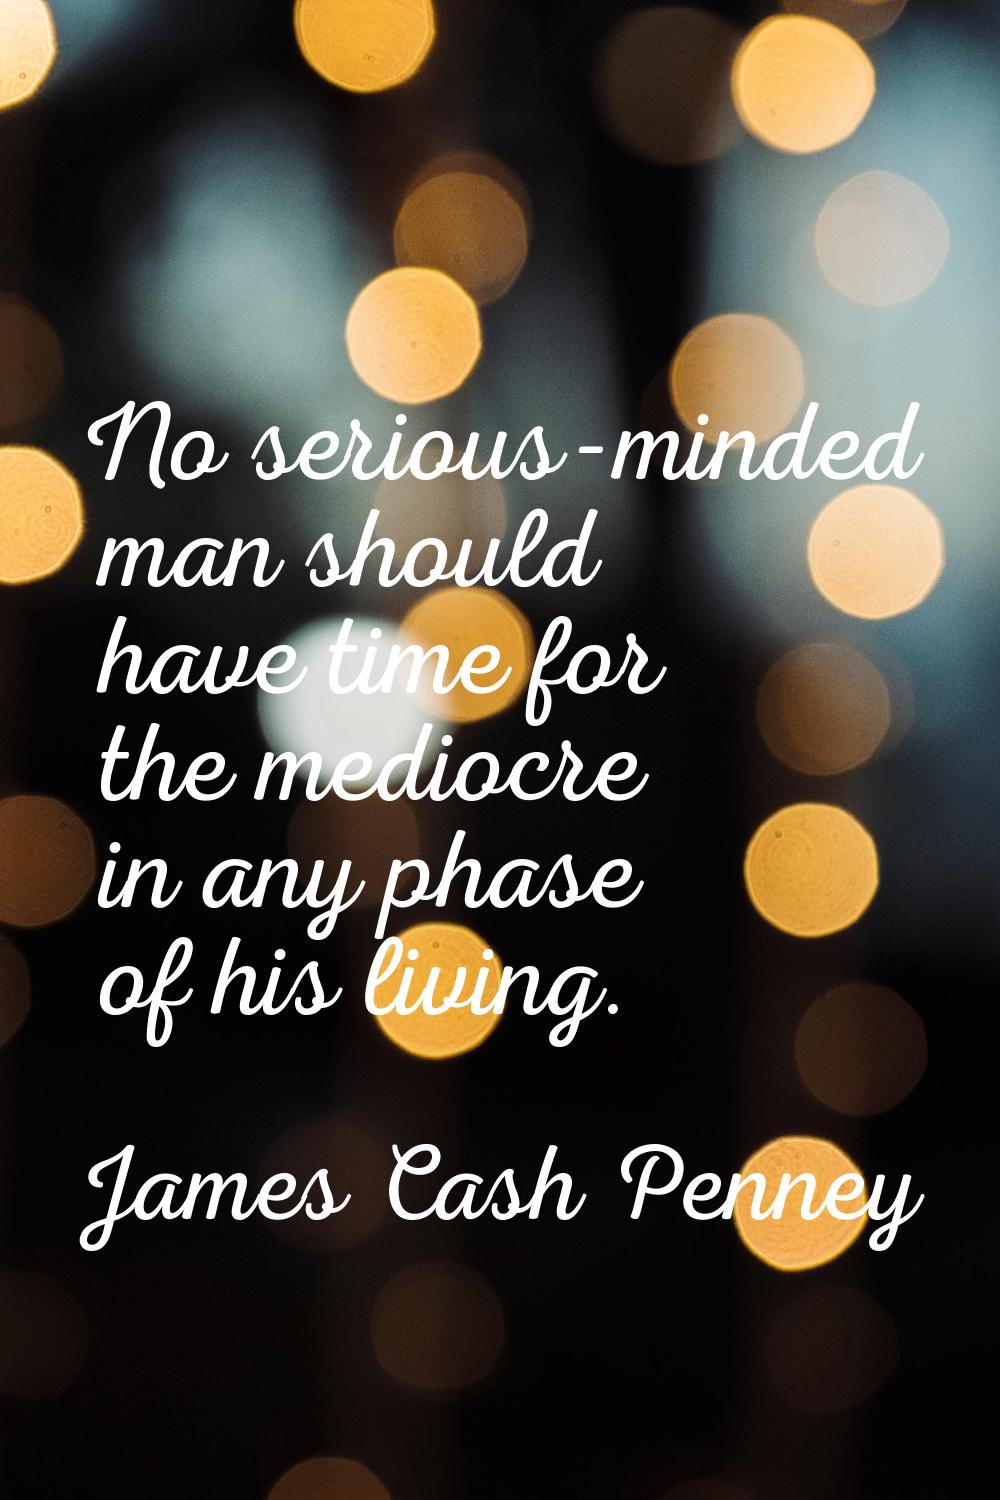 No serious-minded man should have time for the mediocre in any phase of his living.